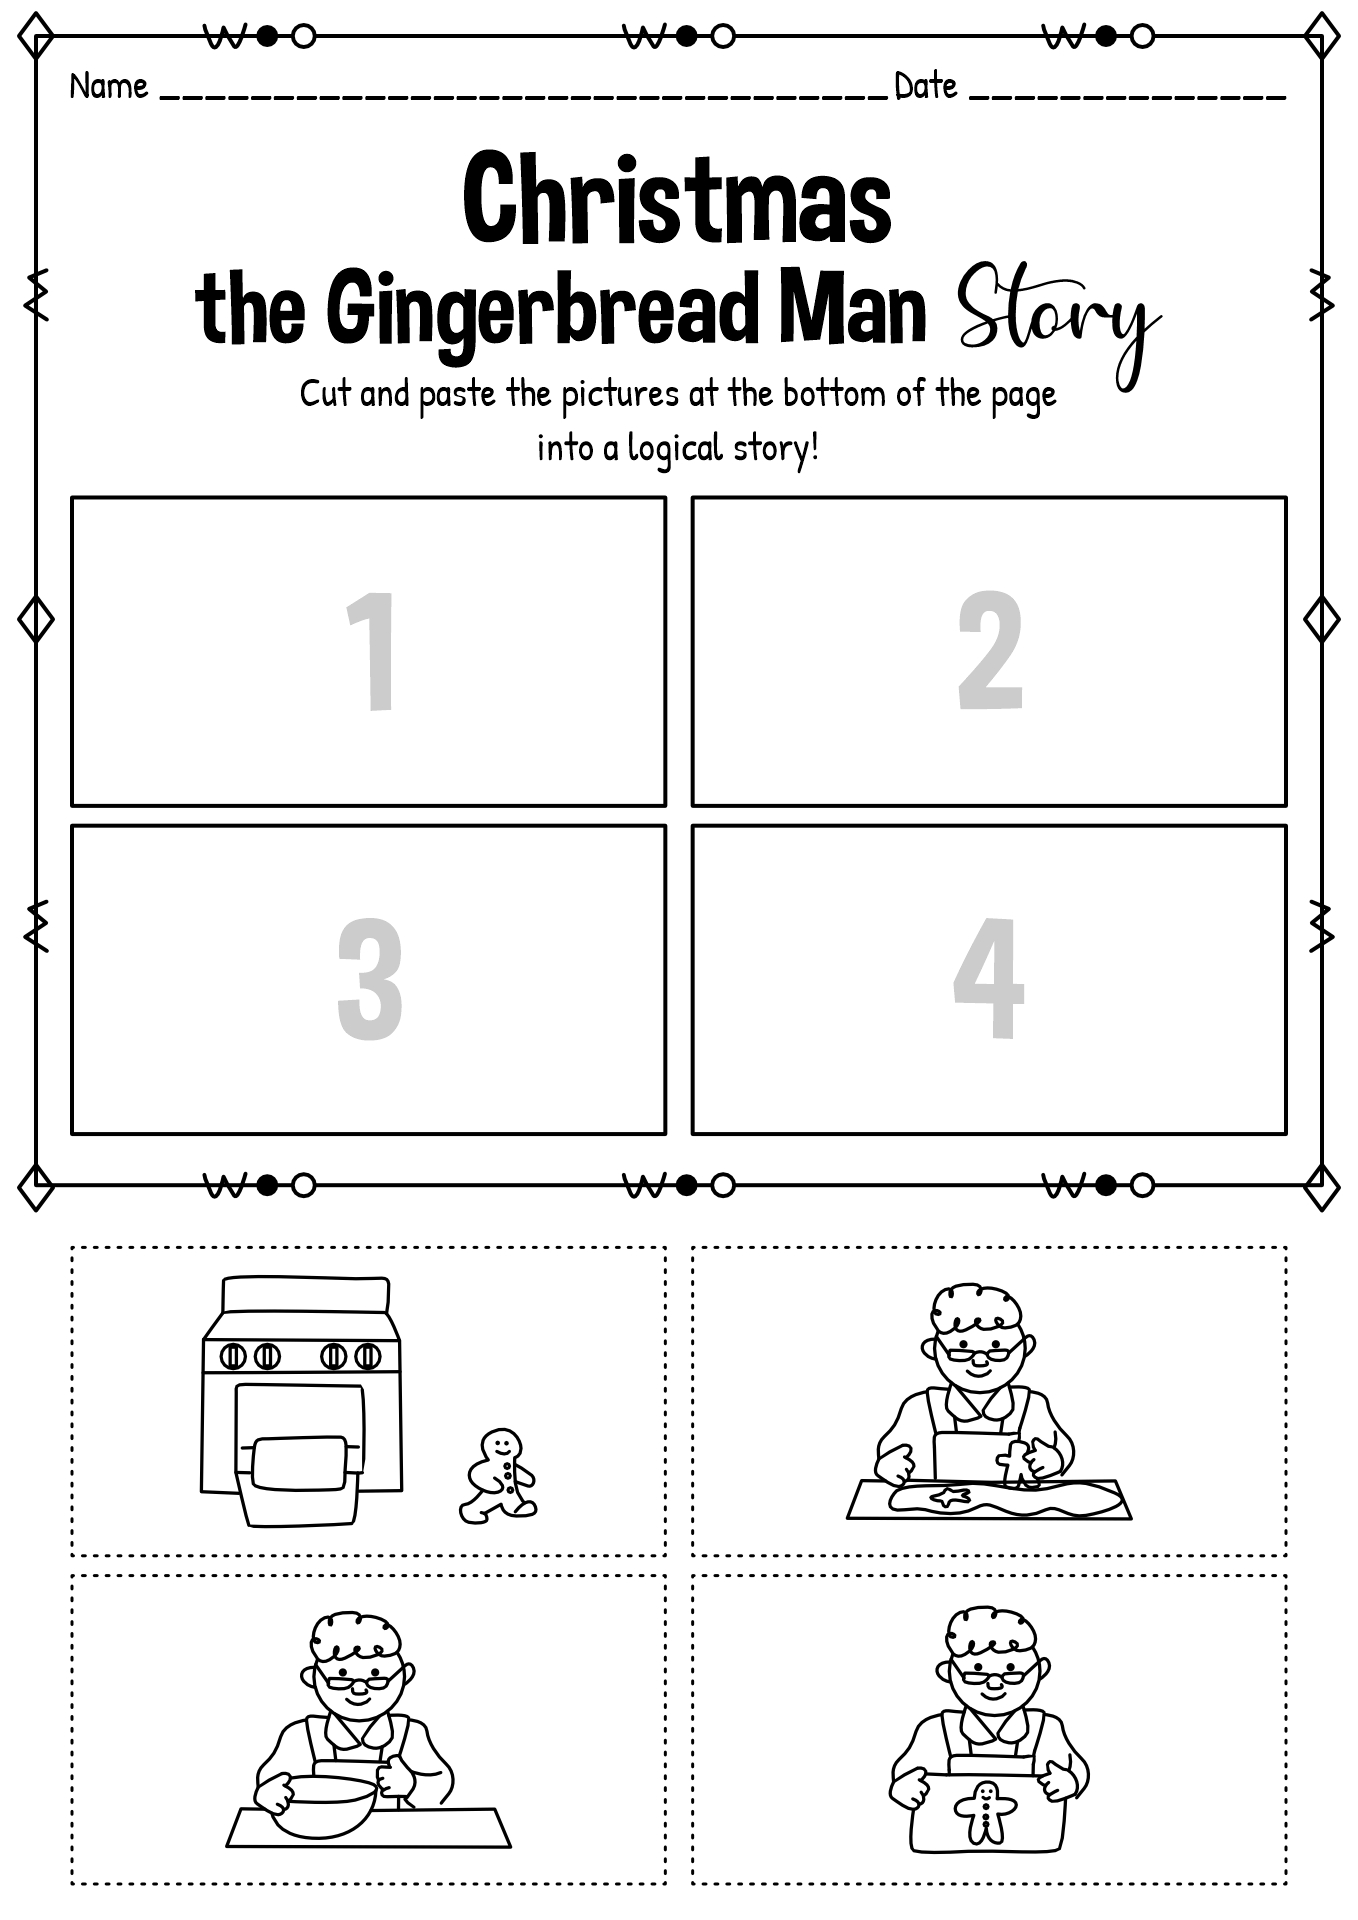 gingerbread-man-sequence